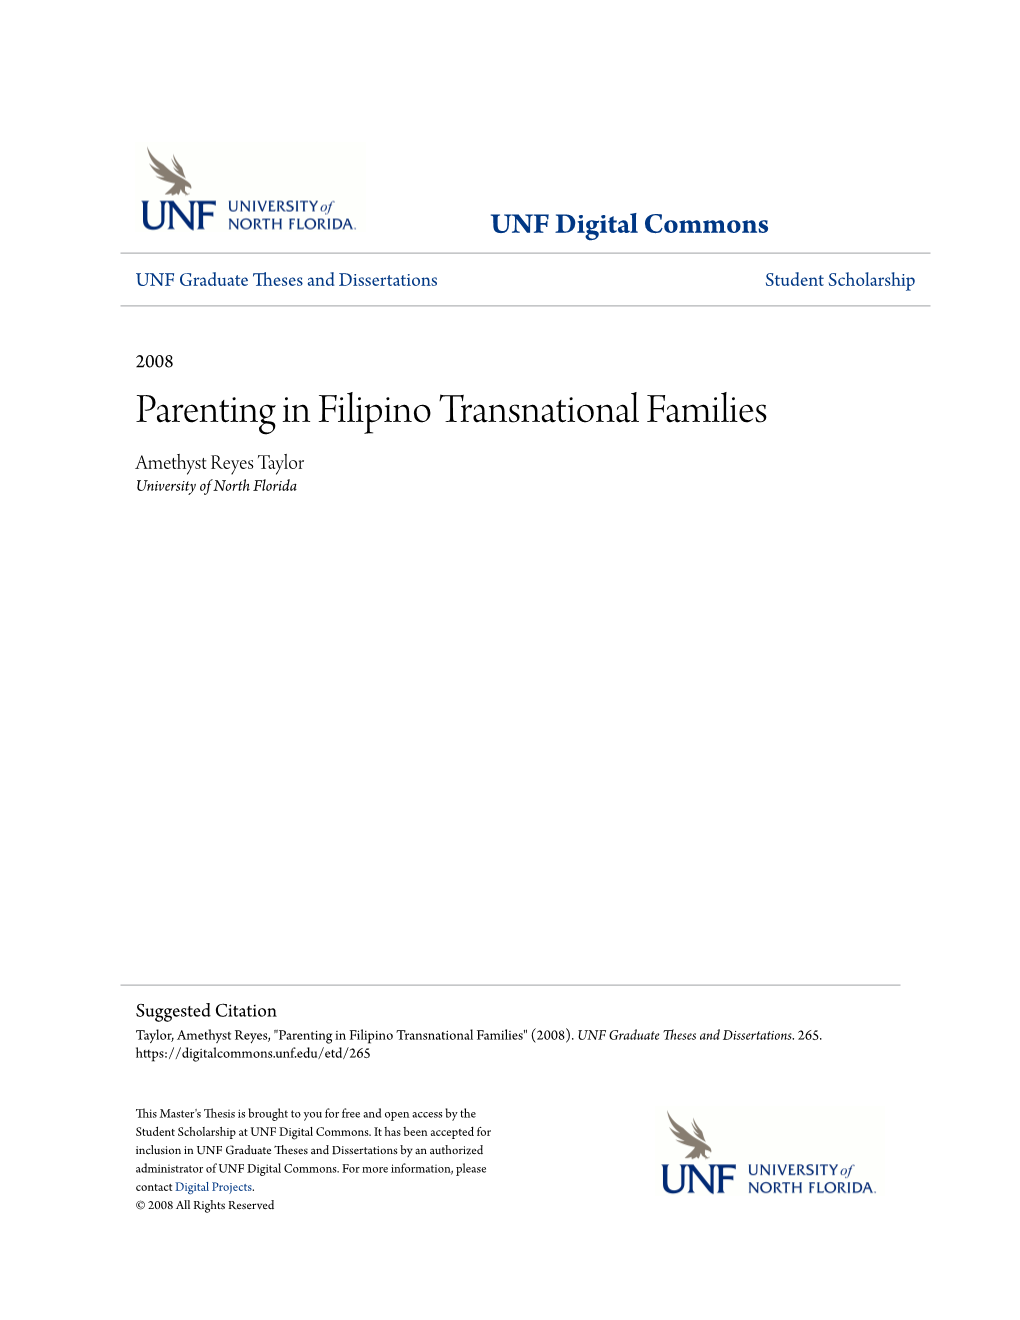 Parenting in Filipino Transnational Families Amethyst Reyes Taylor University of North Florida